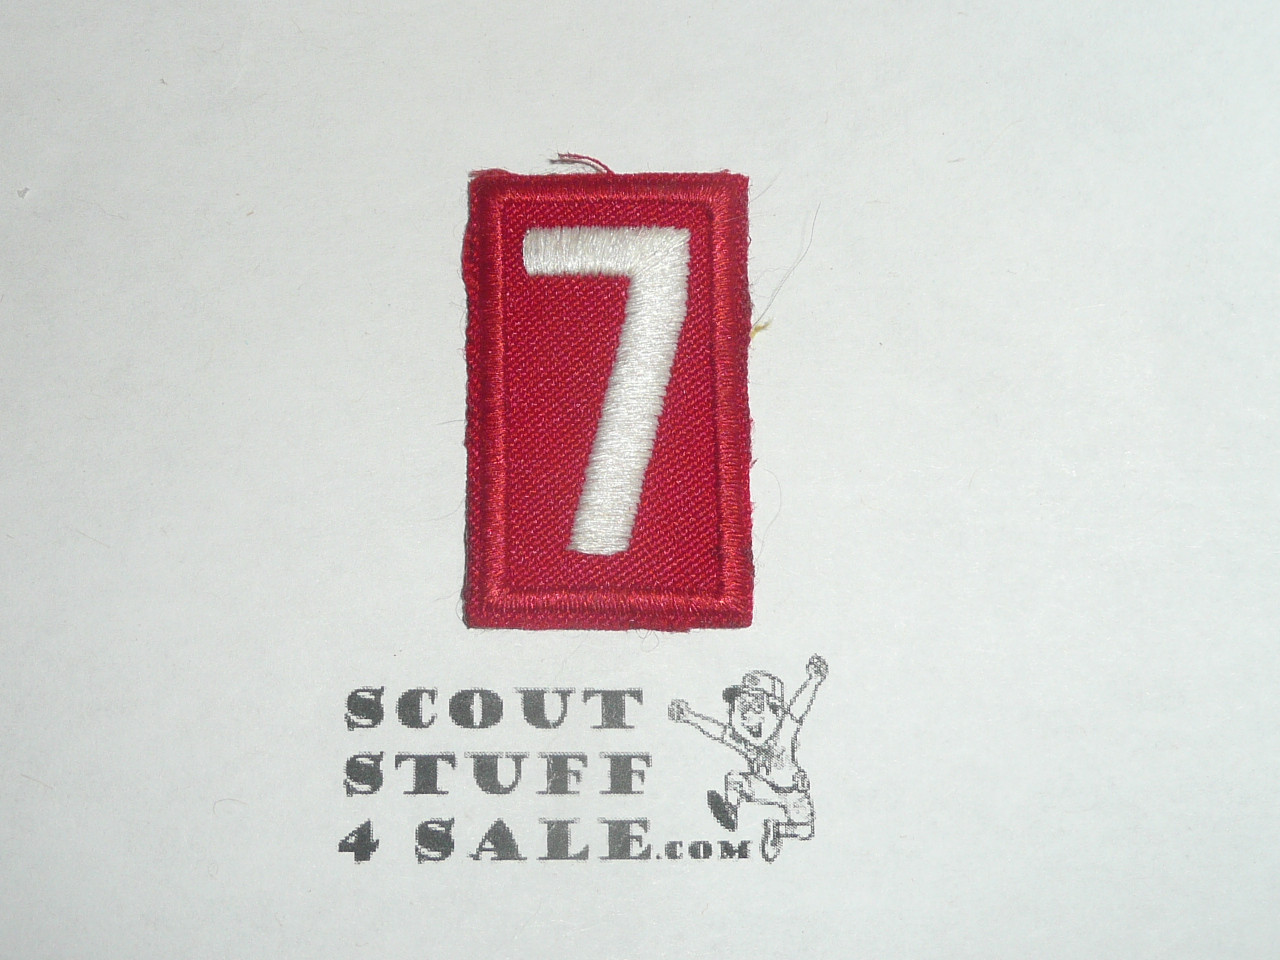 Old Red Troop Numeral "7", twill